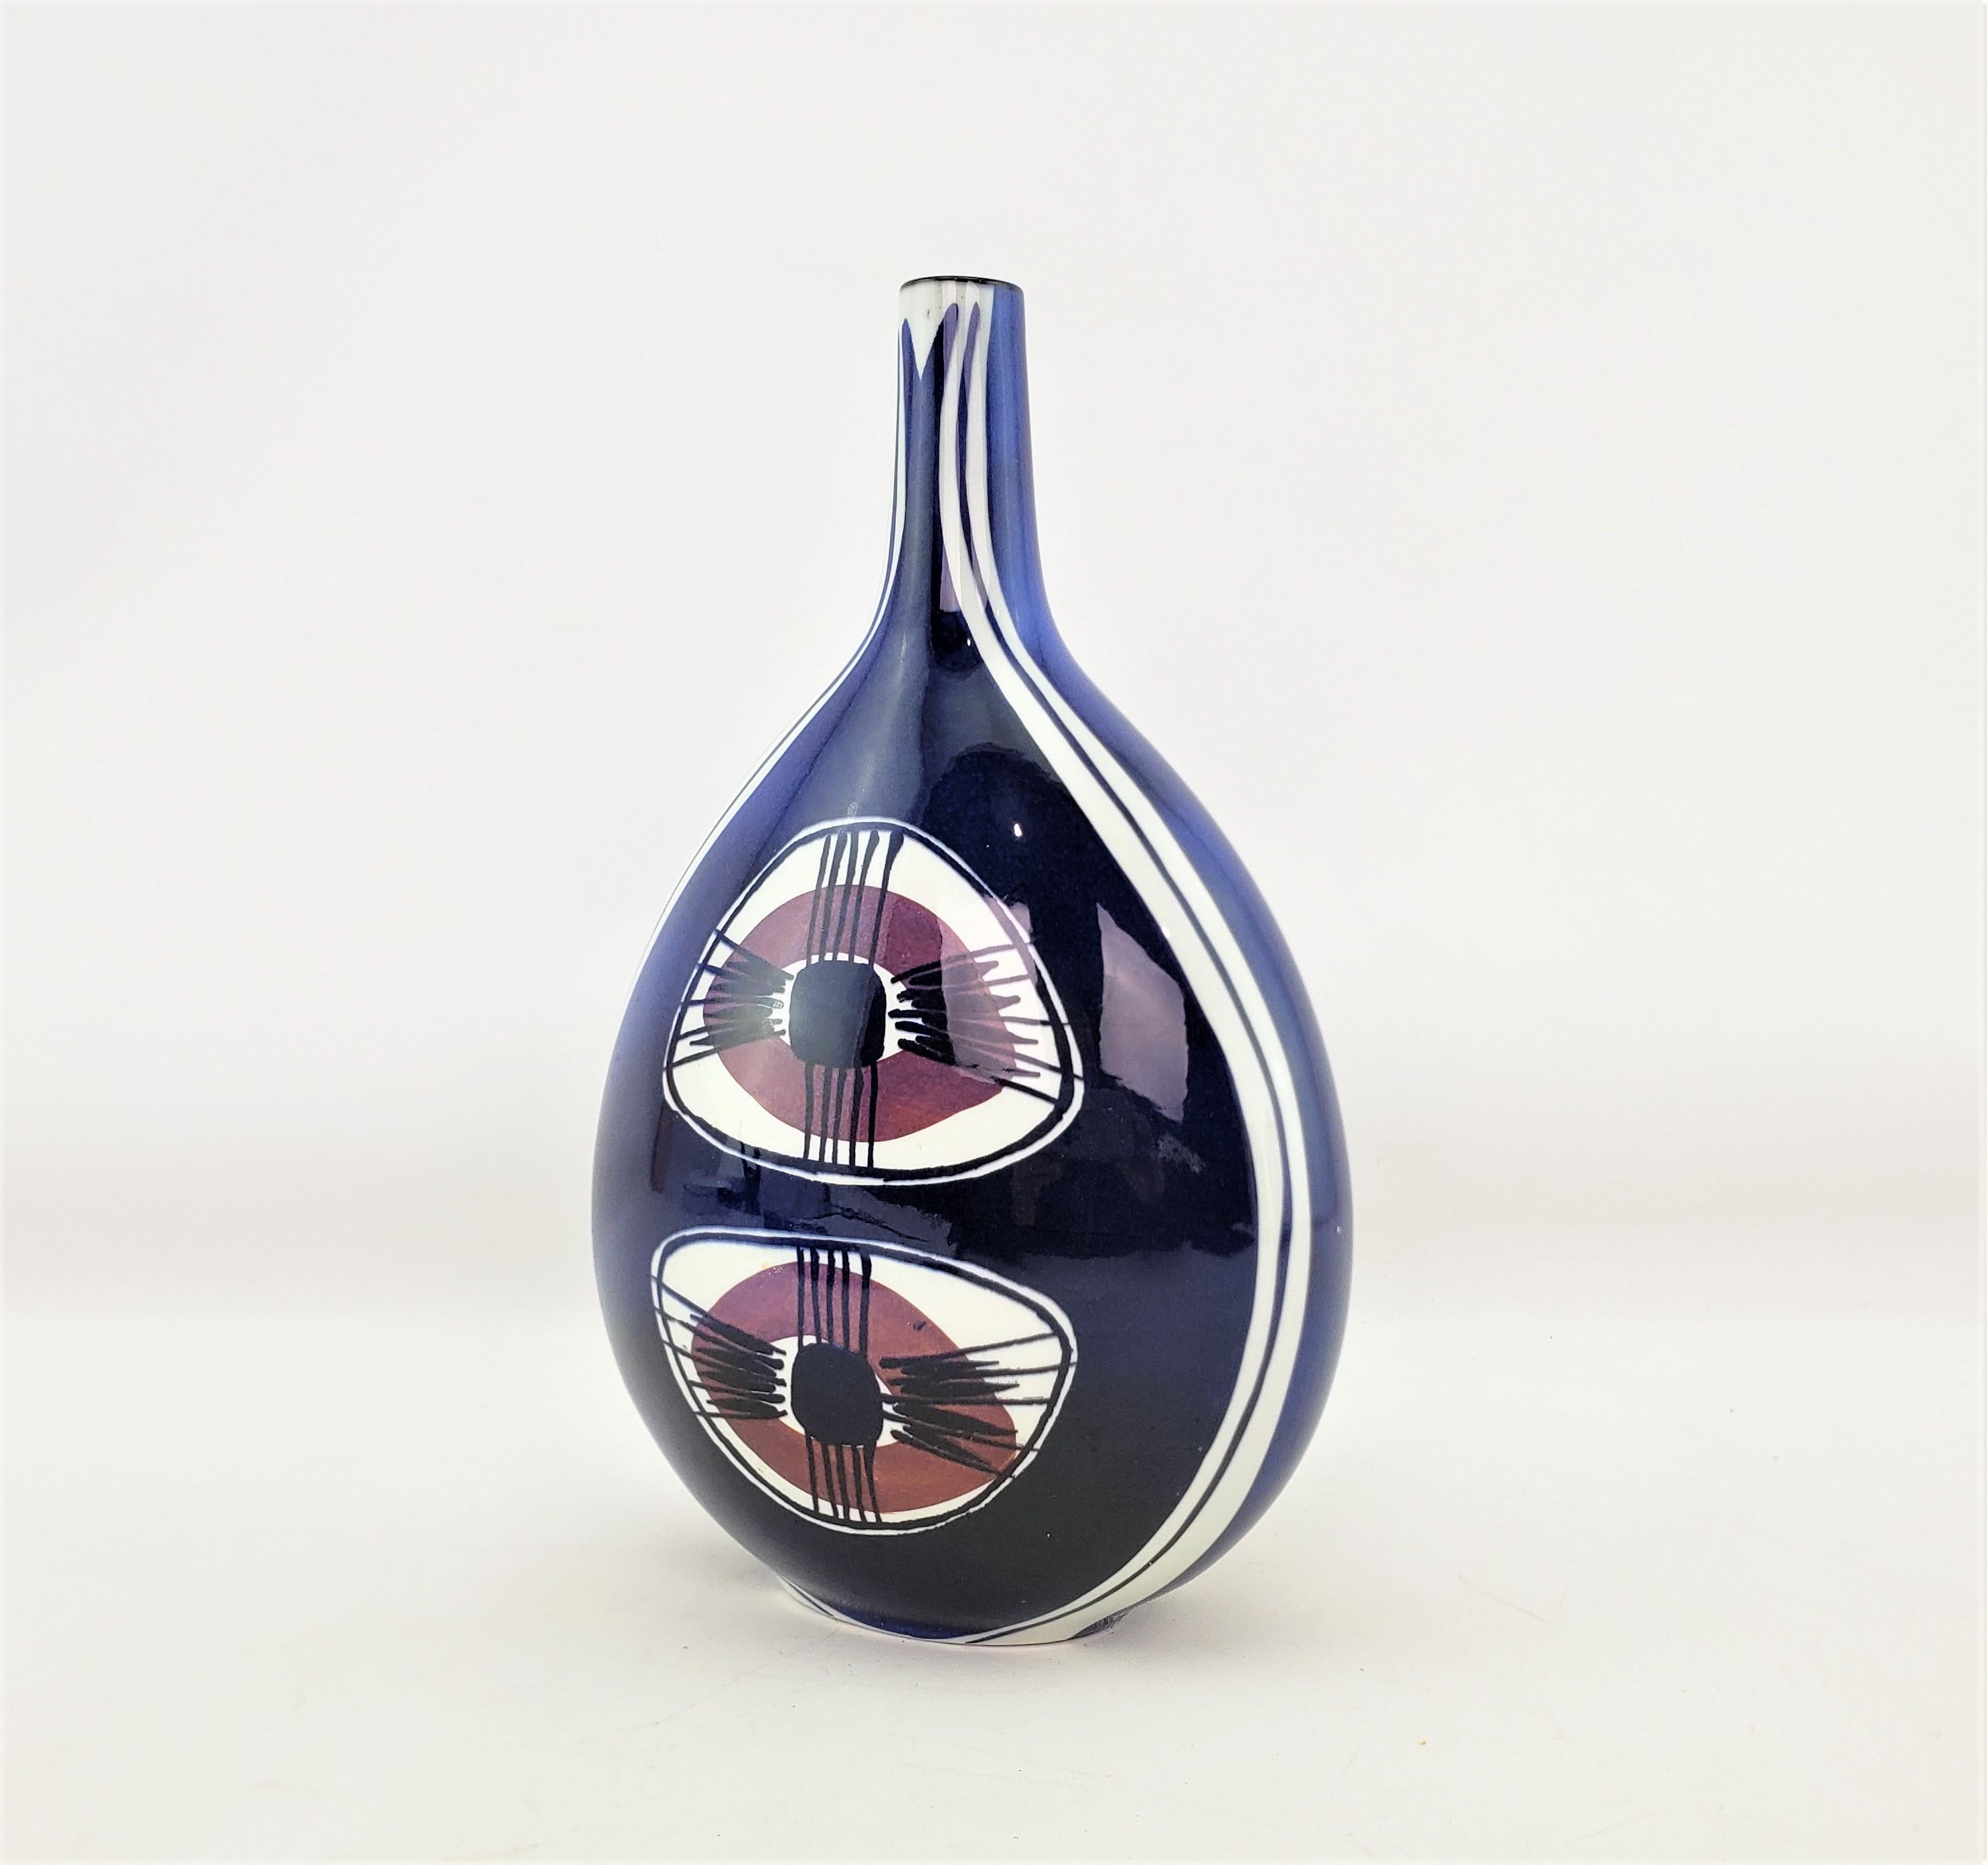 This vase was done by the well known Royal Copenhagen factory of Denmark in approximately 1965 in the period Mid-Century Modern style. This bottle shaped vase was designed by Inge-Lise Koefoed originally for Aluminia which later became Royal